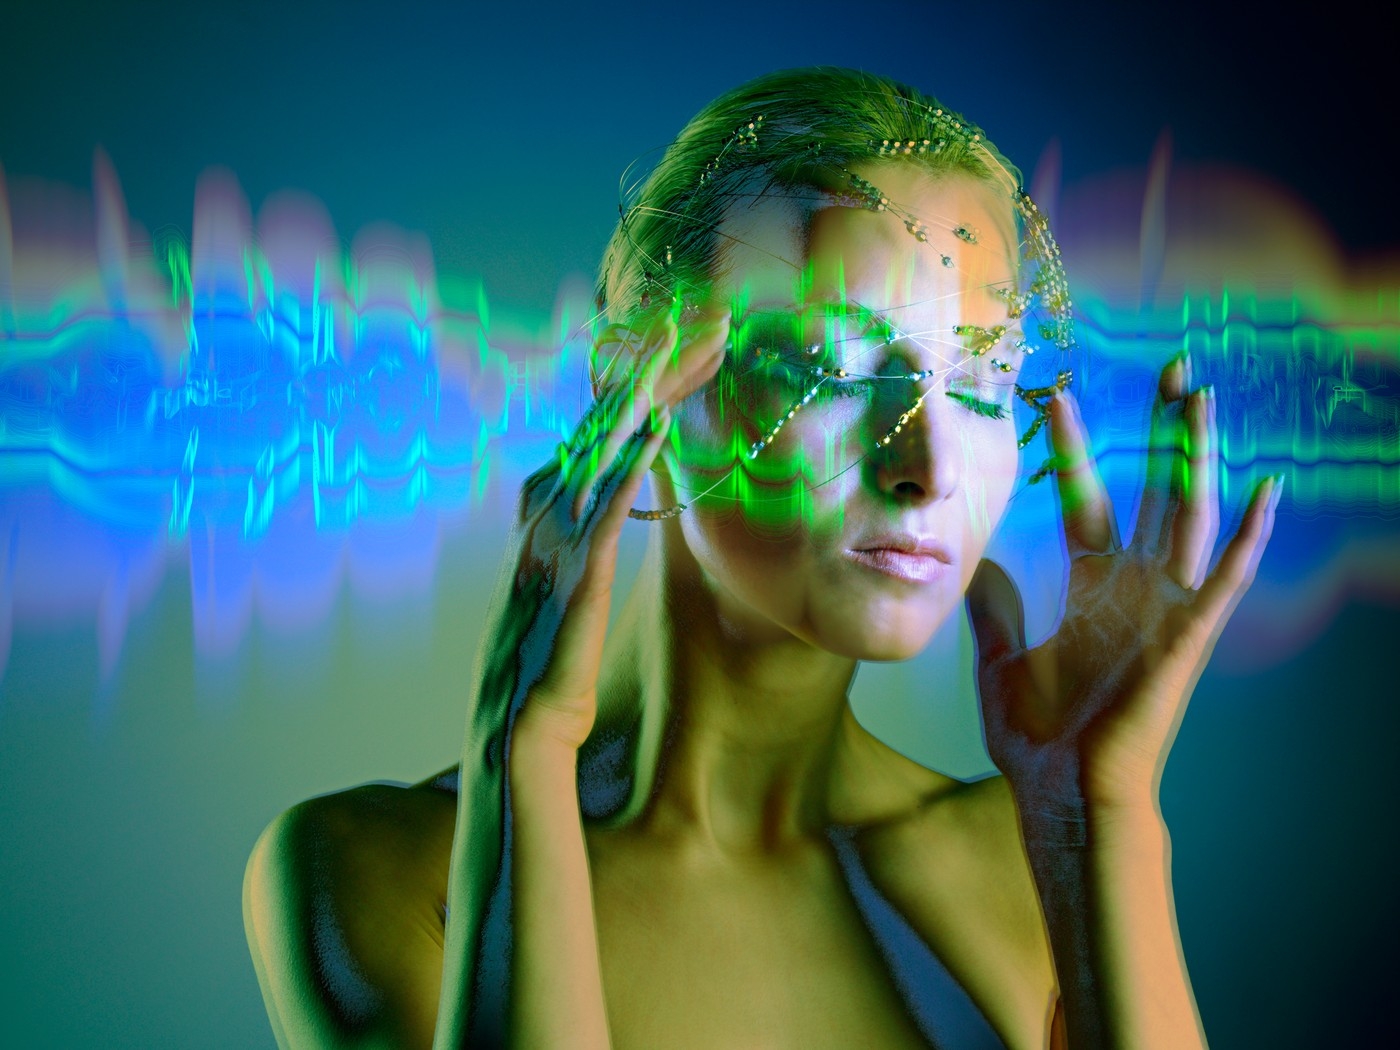 Image: 0102461440, License: Rights managed, MODEL RELEASED. Woman holding her temples, conceptual artwork., Property Release: No or not aplicable, Model Release: No or not aplicable, Credit line: Profimedia-Red Dot, Sciencephoto RM